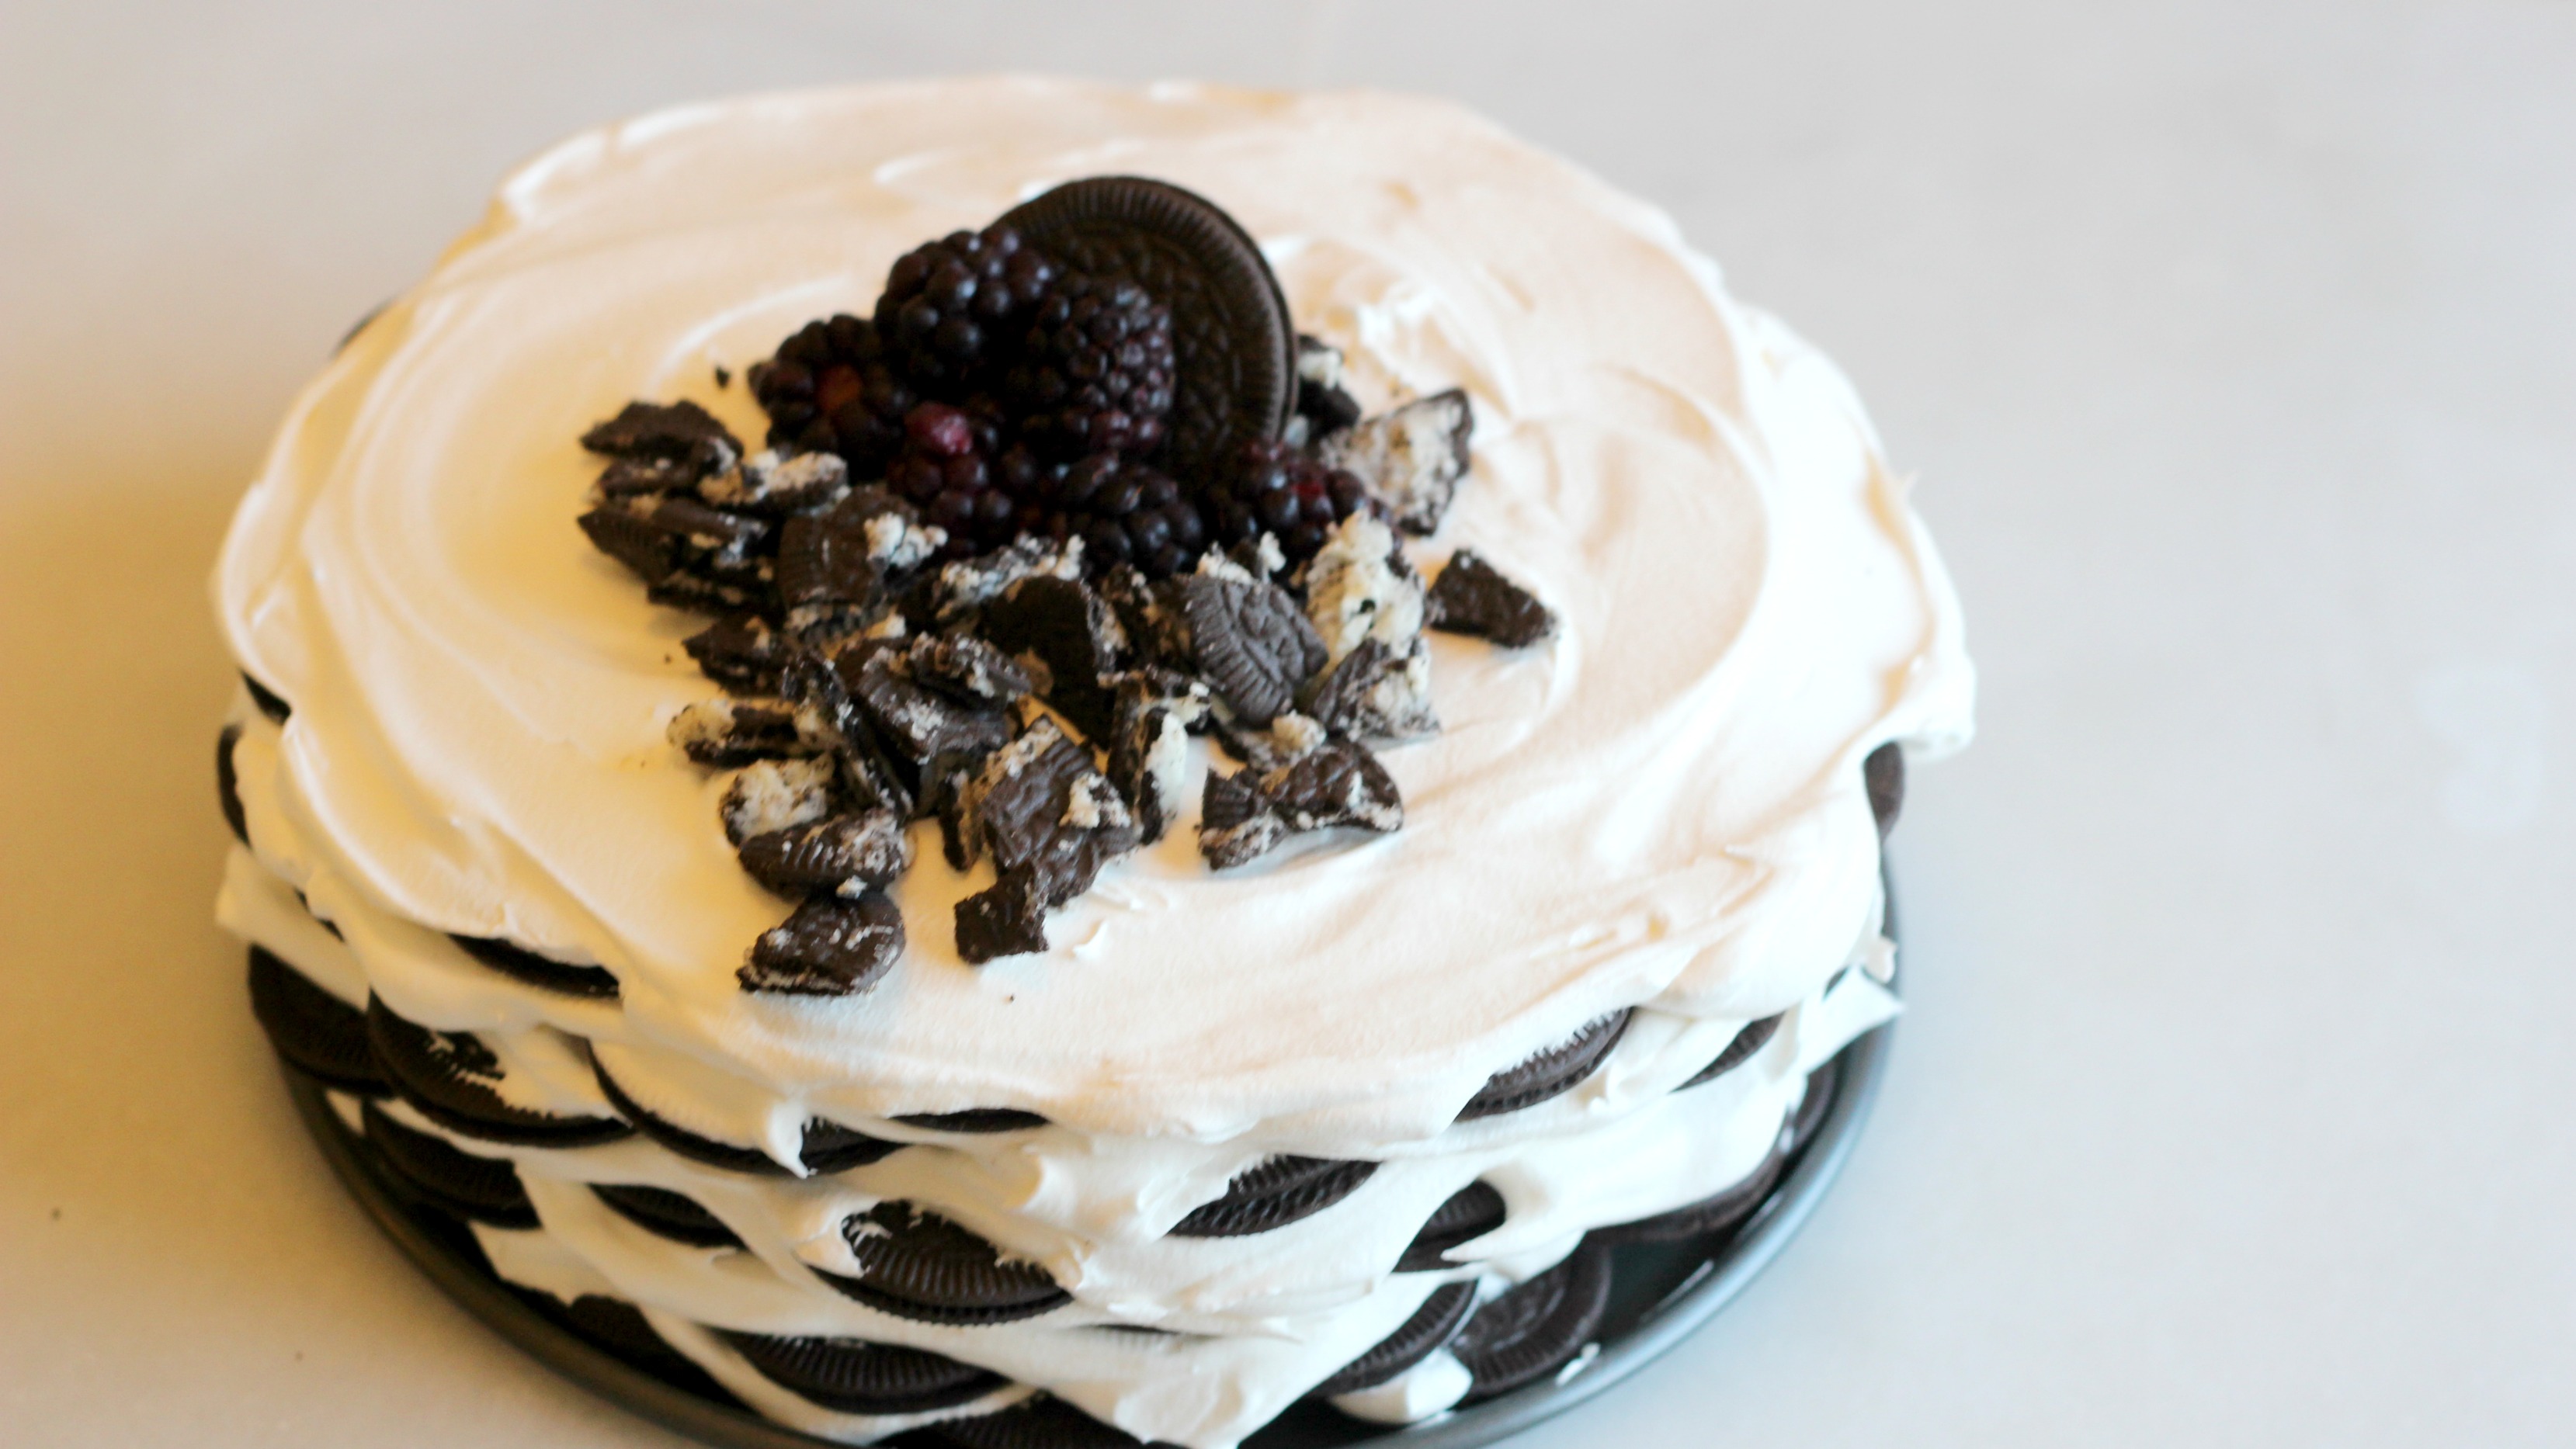 You Should Be Making (and Eating) More Icebox Cakes